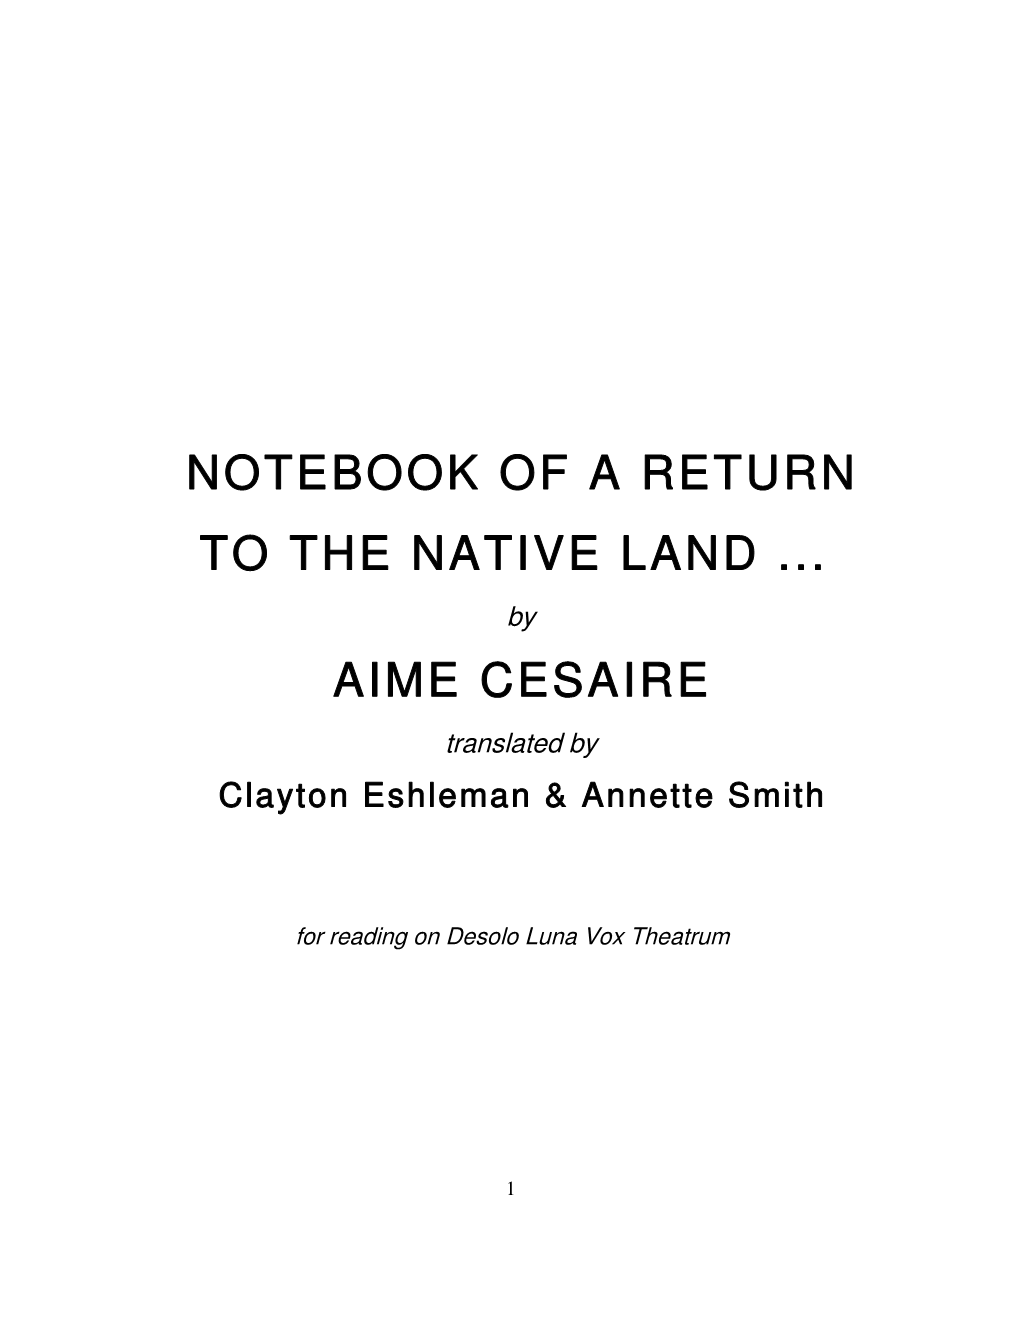 Notebook of a Return to the Native Land ... Aime Cesaire